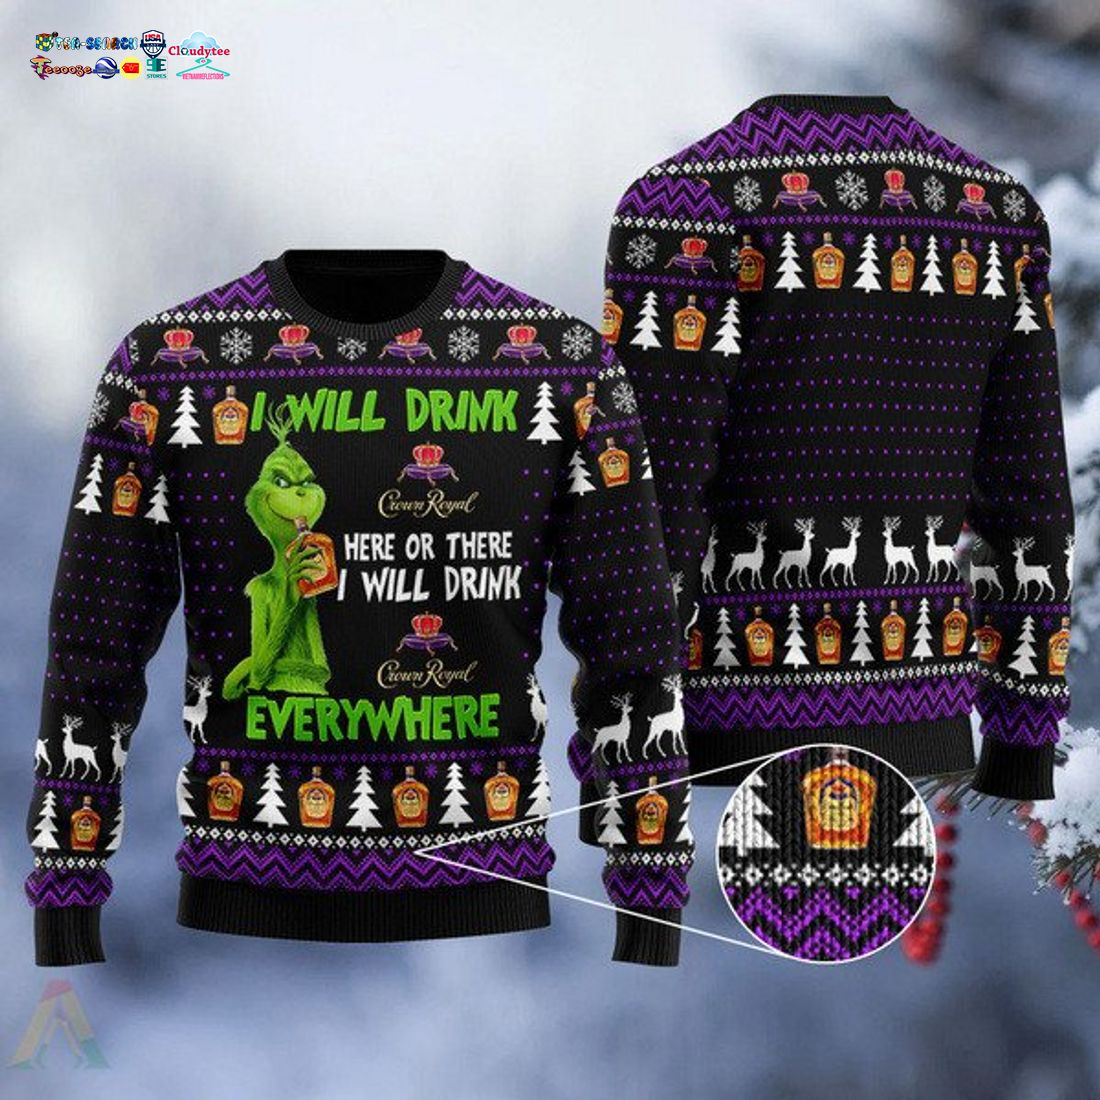 Grinch I Will Drink Crown Royal Everywhere Ver 2 Ugly Christmas Sweater